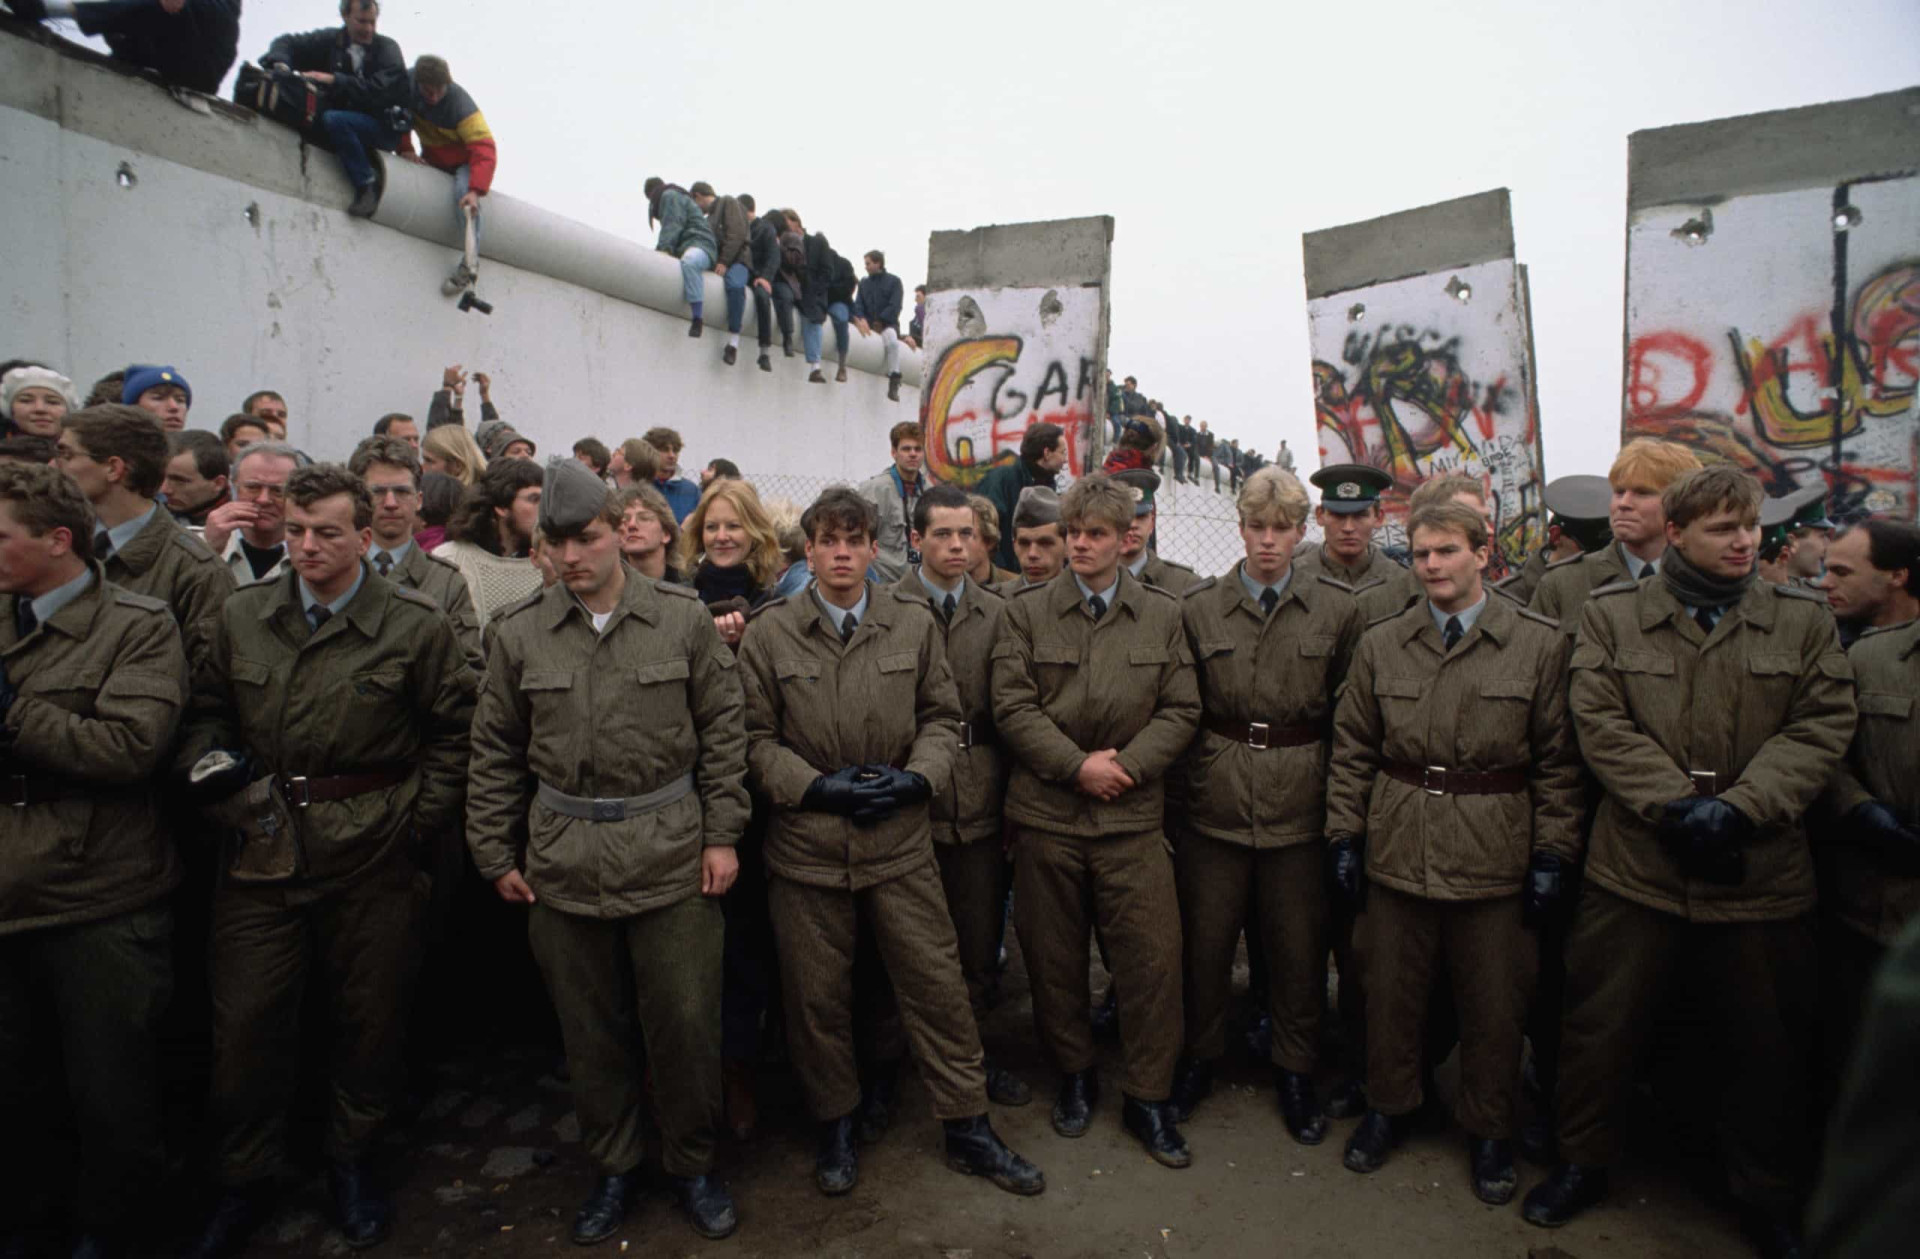 <p>The fall of the Berlin Wall on November 1990 and the Iron Curtain, along with the reunification of Germany, sees the beginning of the end of the Cold War.</p><p><a href="https://www.msn.com/en-au/community/channel/vid-7xx8mnucu55yw63we9va2gwr7uihbxwc68fxqp25x6tg4ftibpra?cvid=94631541bc0f4f89bfd59158d696ad7e">Follow us and access great exclusive content every day</a></p>